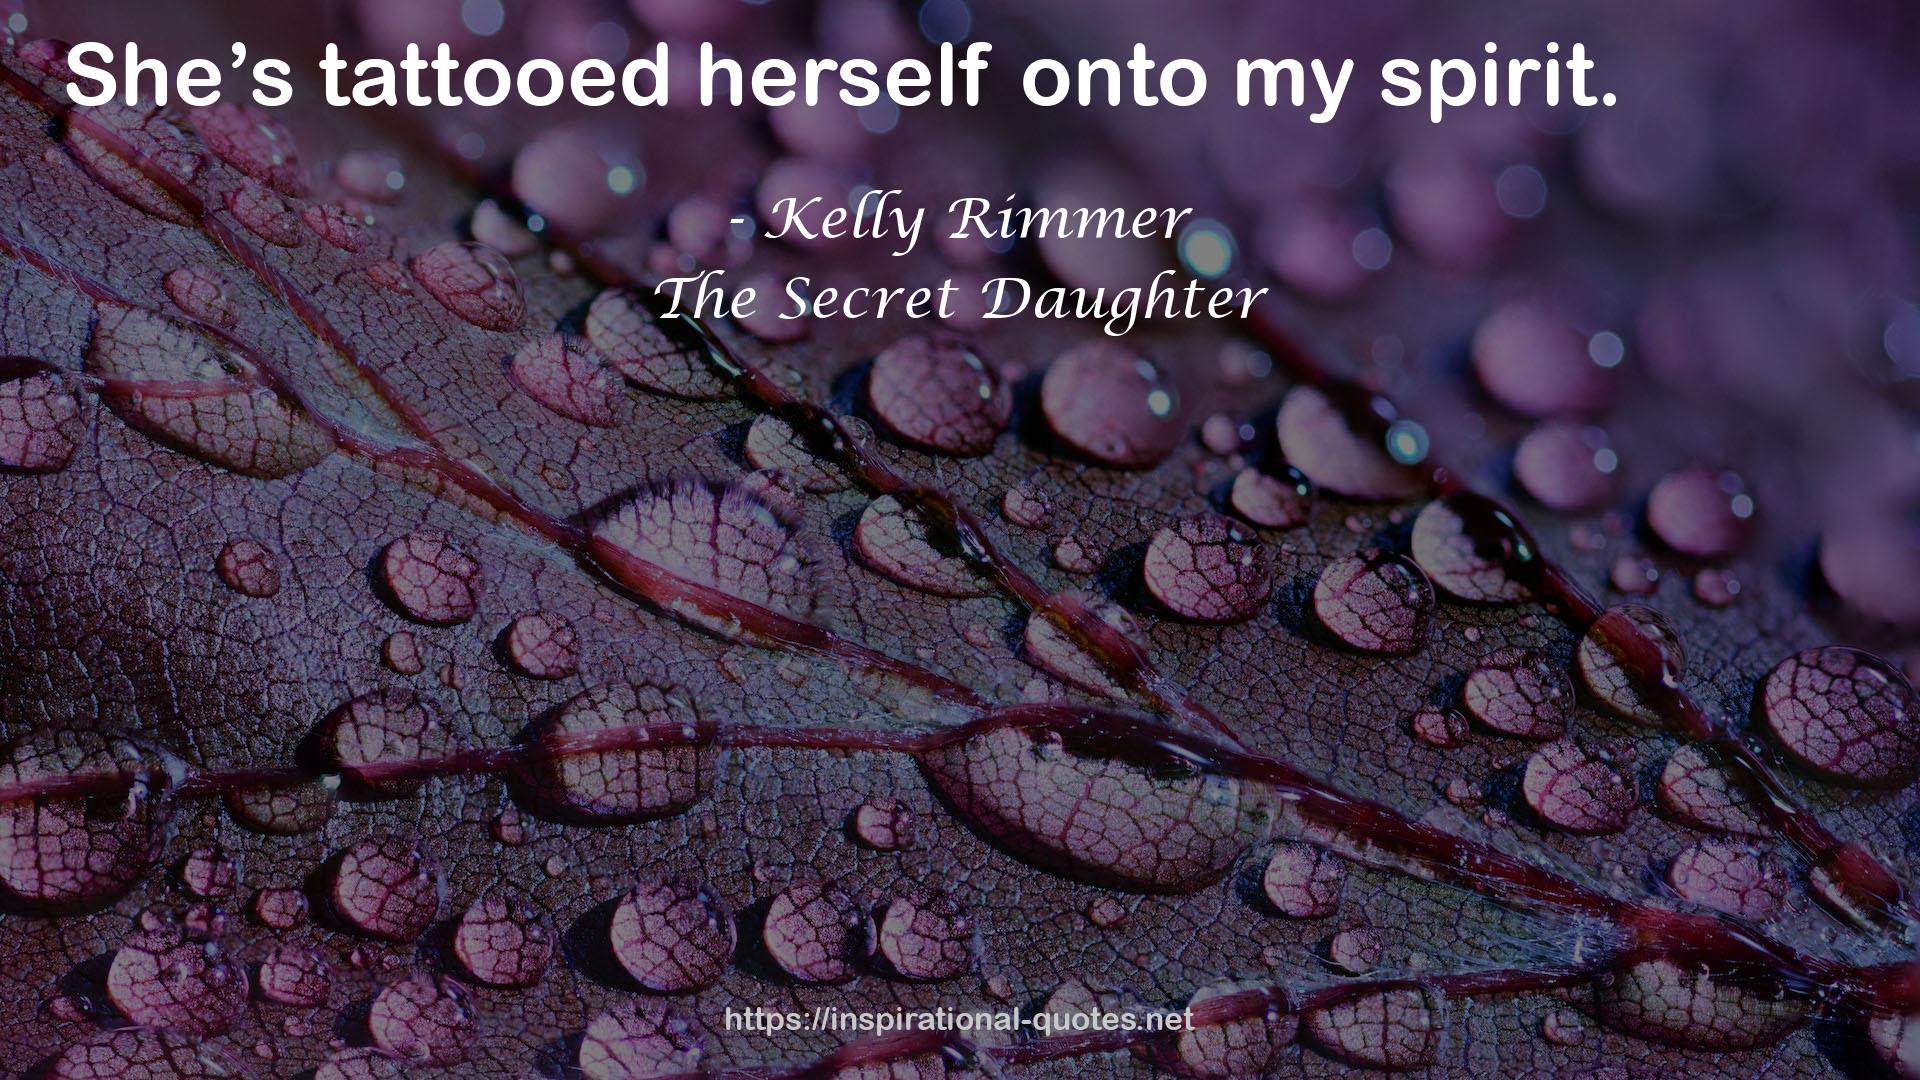 Kelly Rimmer QUOTES